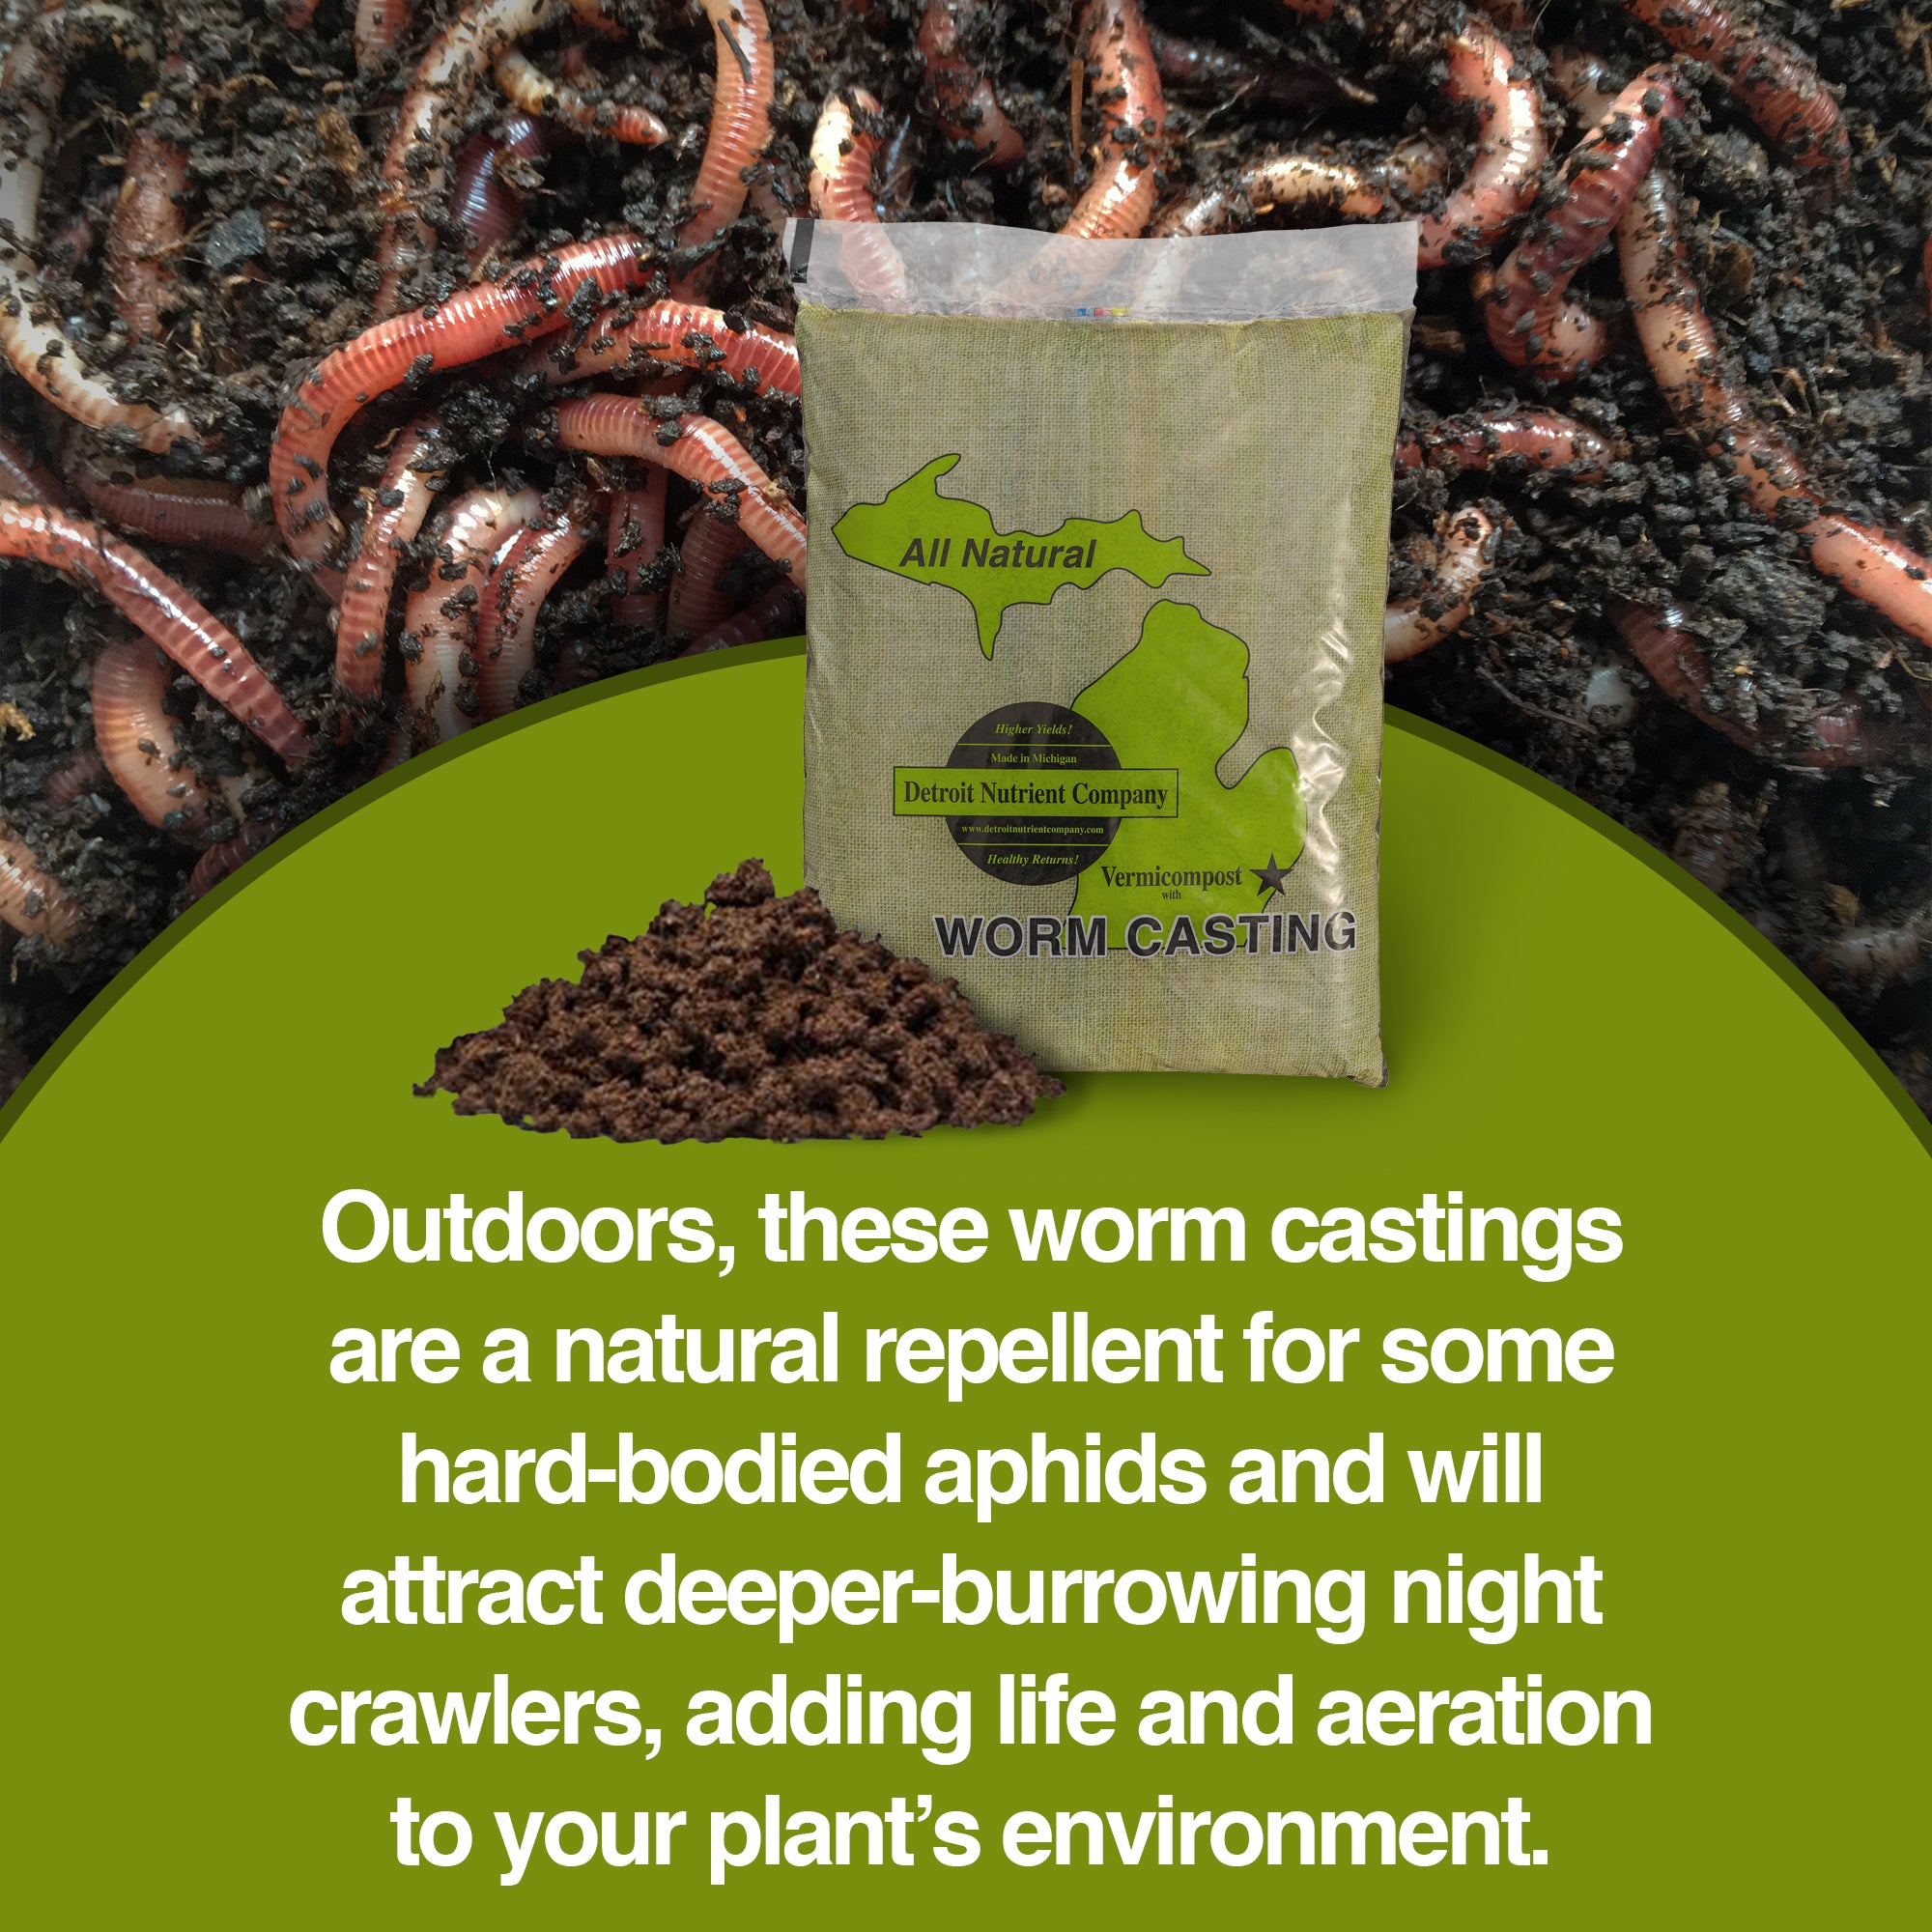 Detroit Nutrient Company All Natural Vermicompost Worm Castings, 25 Pounds